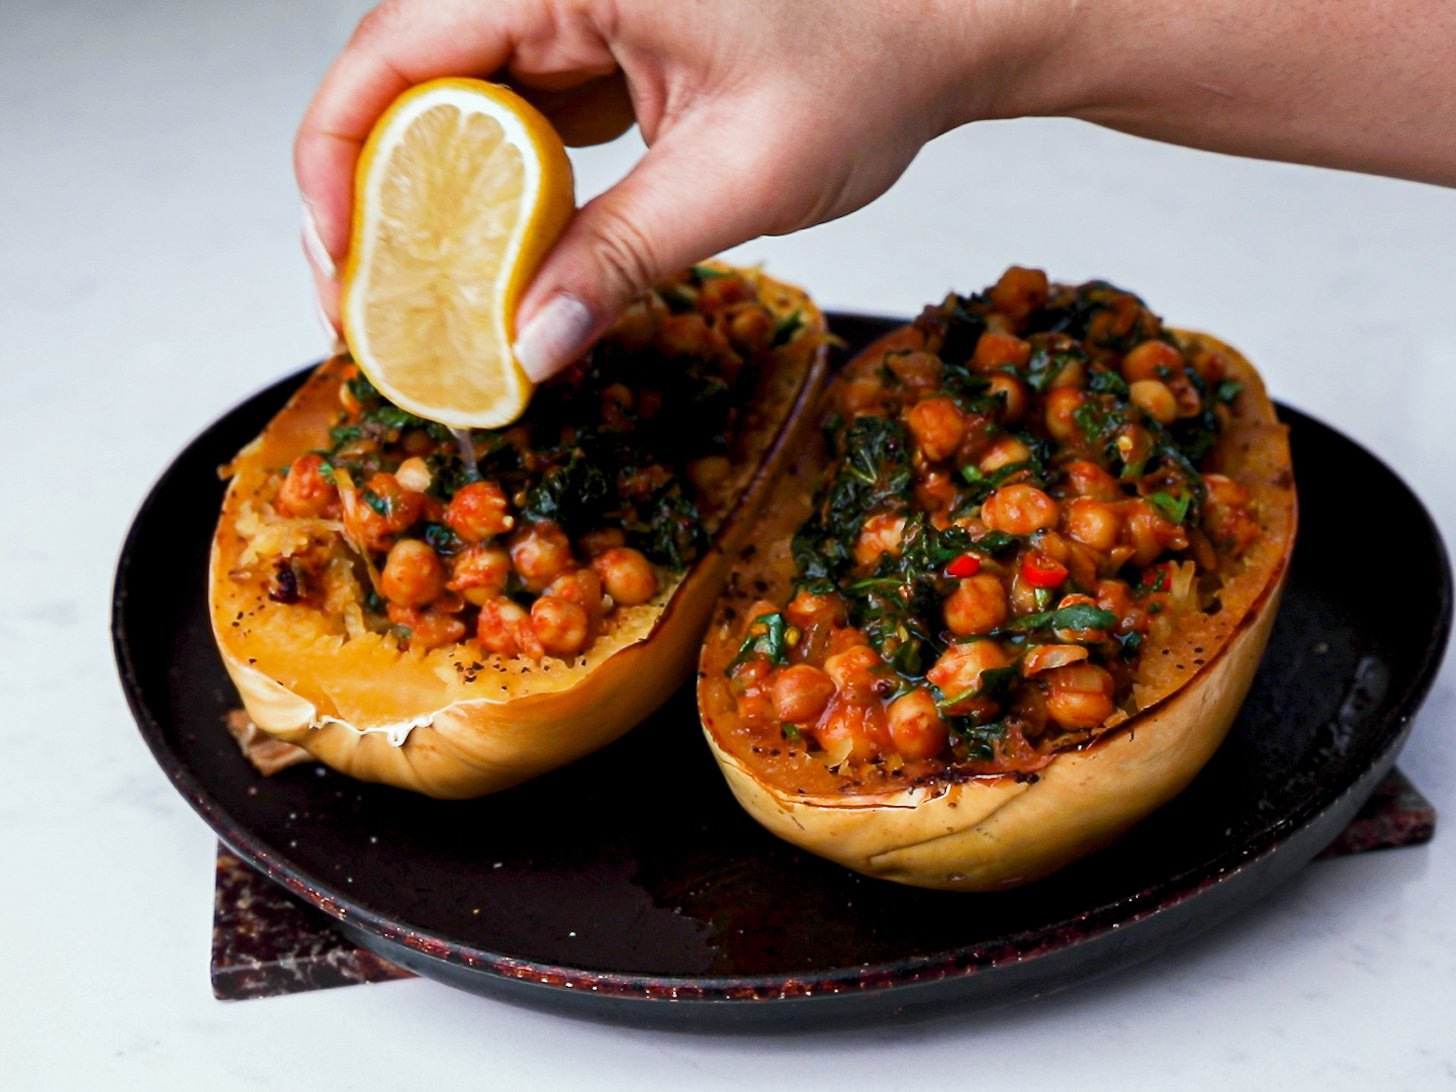 A hand squeezing a lemon half over cooked spaghetti squash stuffed with chickpea curry.